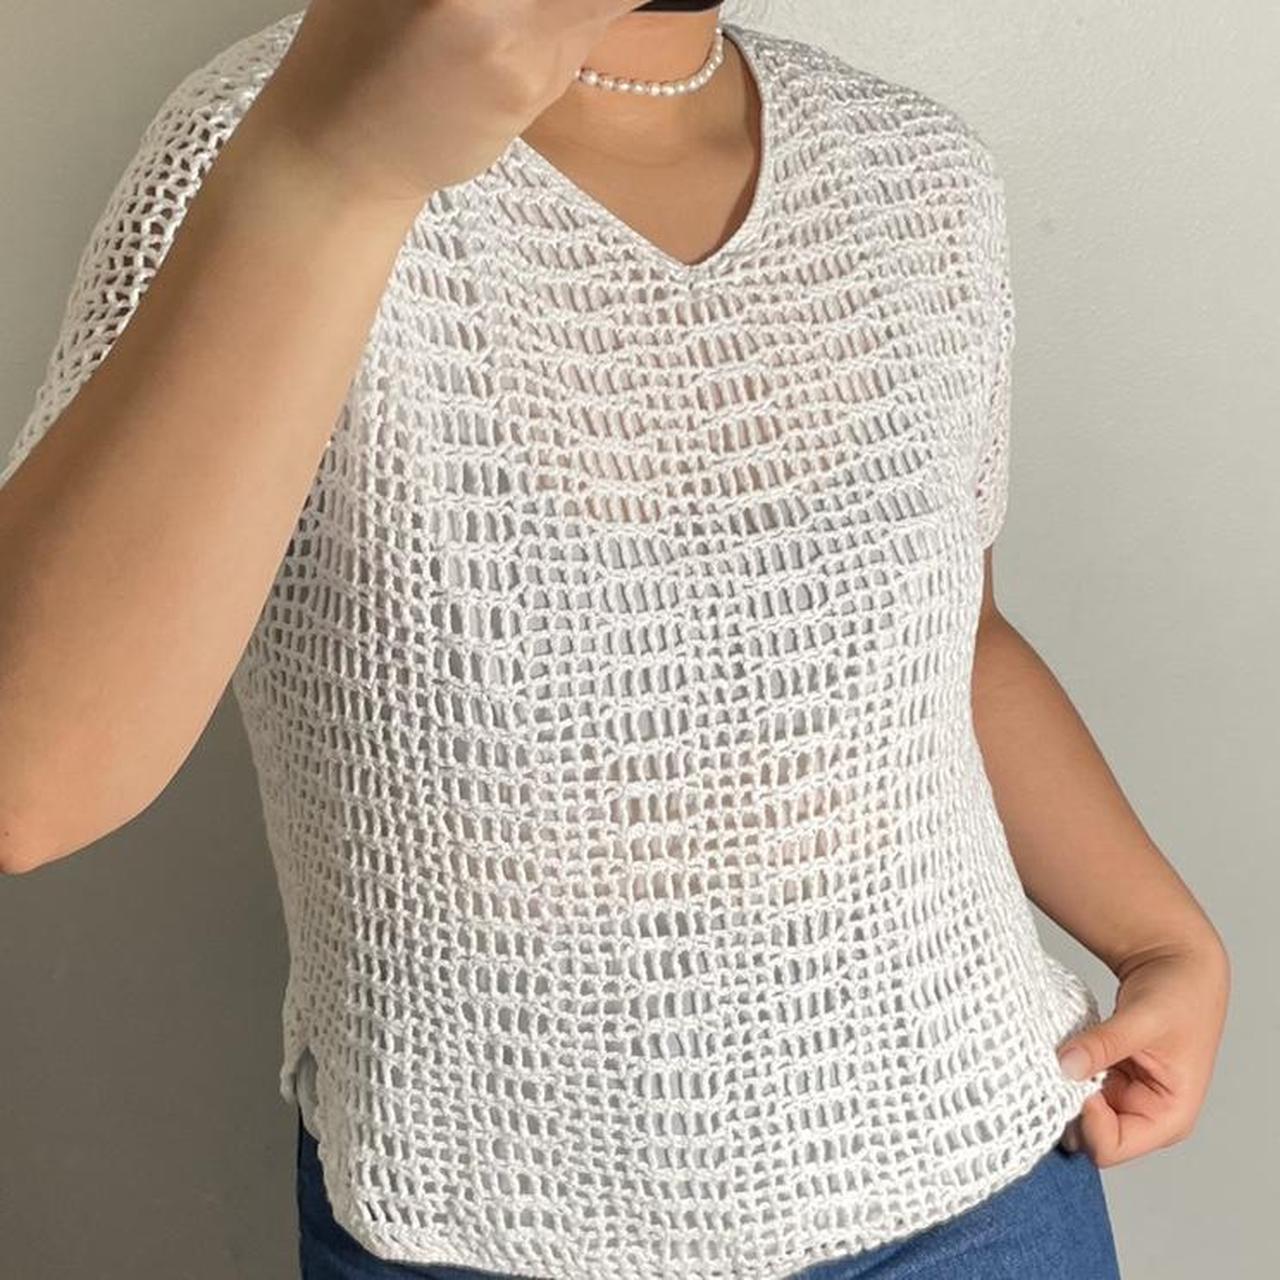 Product Image 3 - White Knit Top

It has two